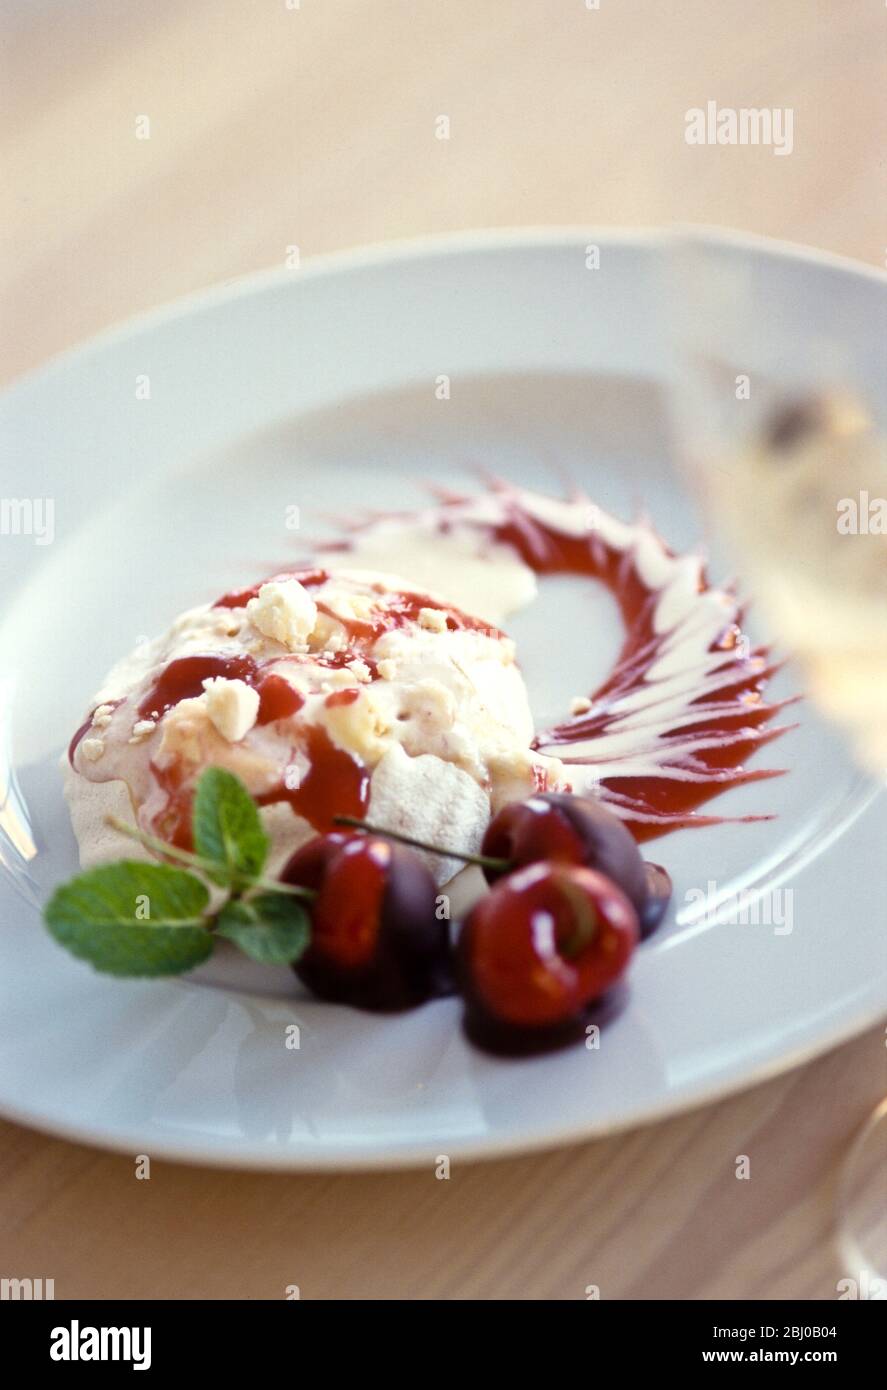 Spectacular, dessert of meringue with vanilla ice cream, cherry coulis and fresh cherries dipped in dark chocolate on white plate garnished with mint Stock Photo